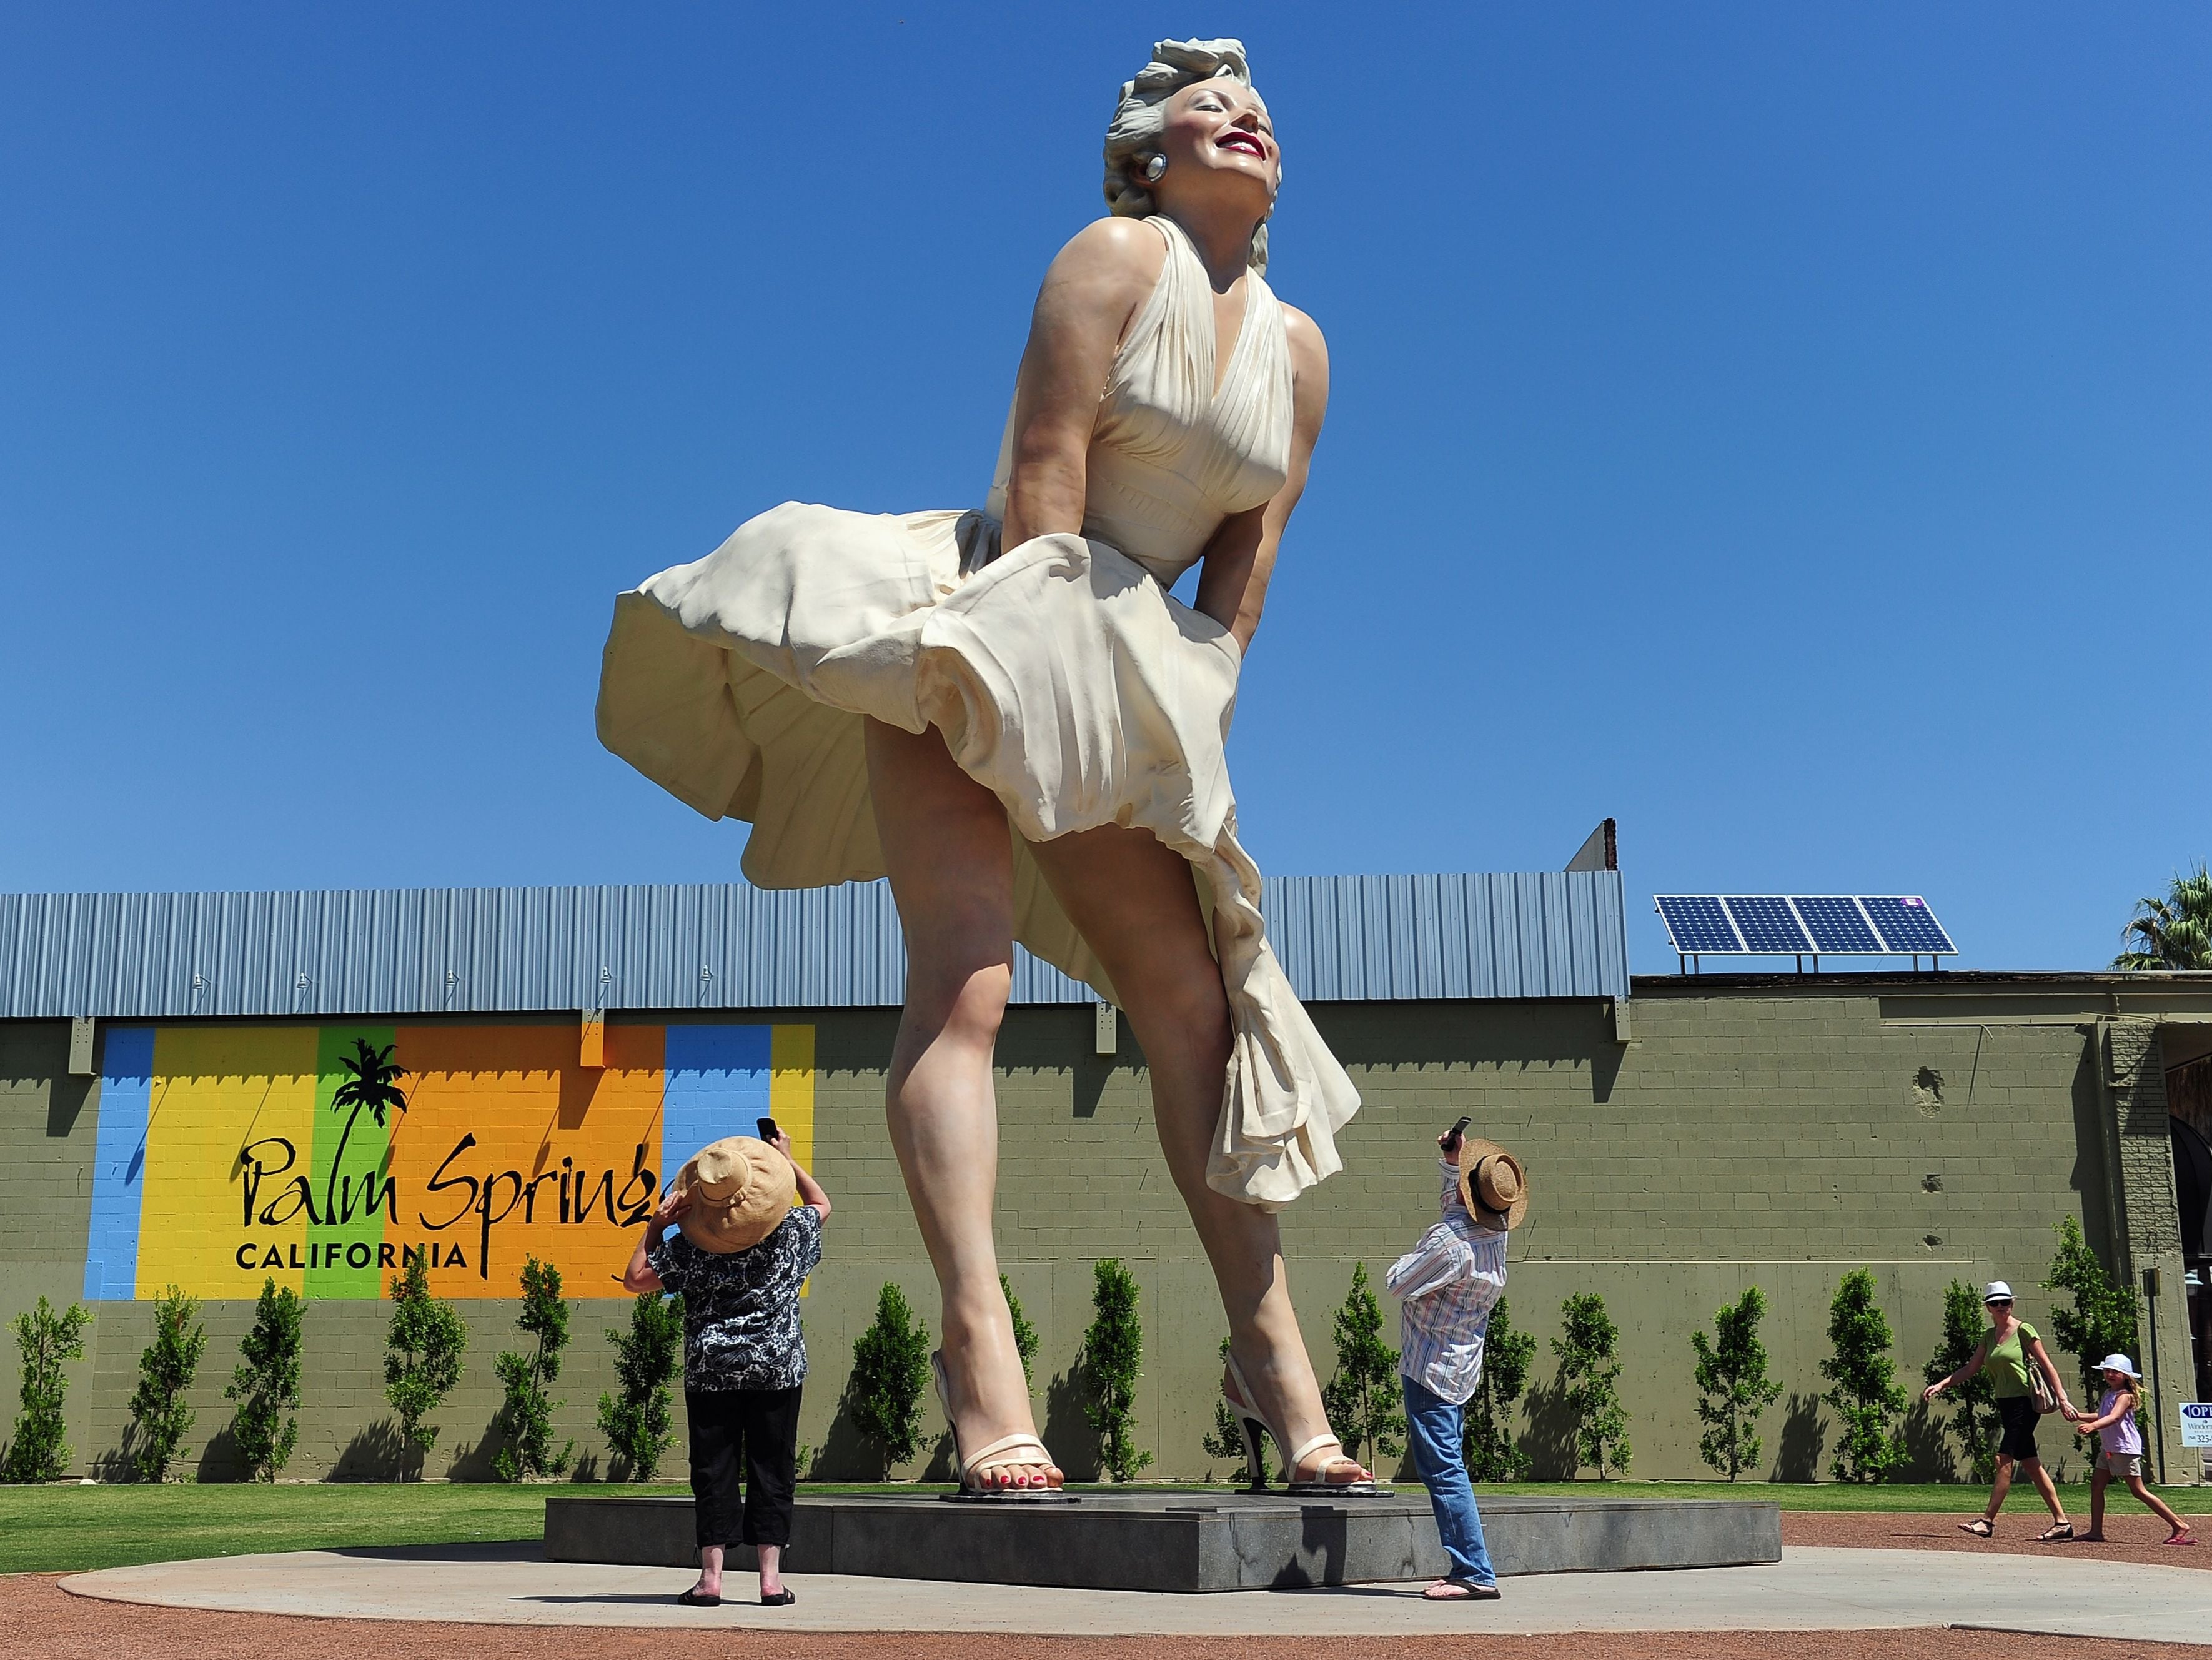 Backlash hits giant Marilyn Monroe statue for 'forcing upskirting